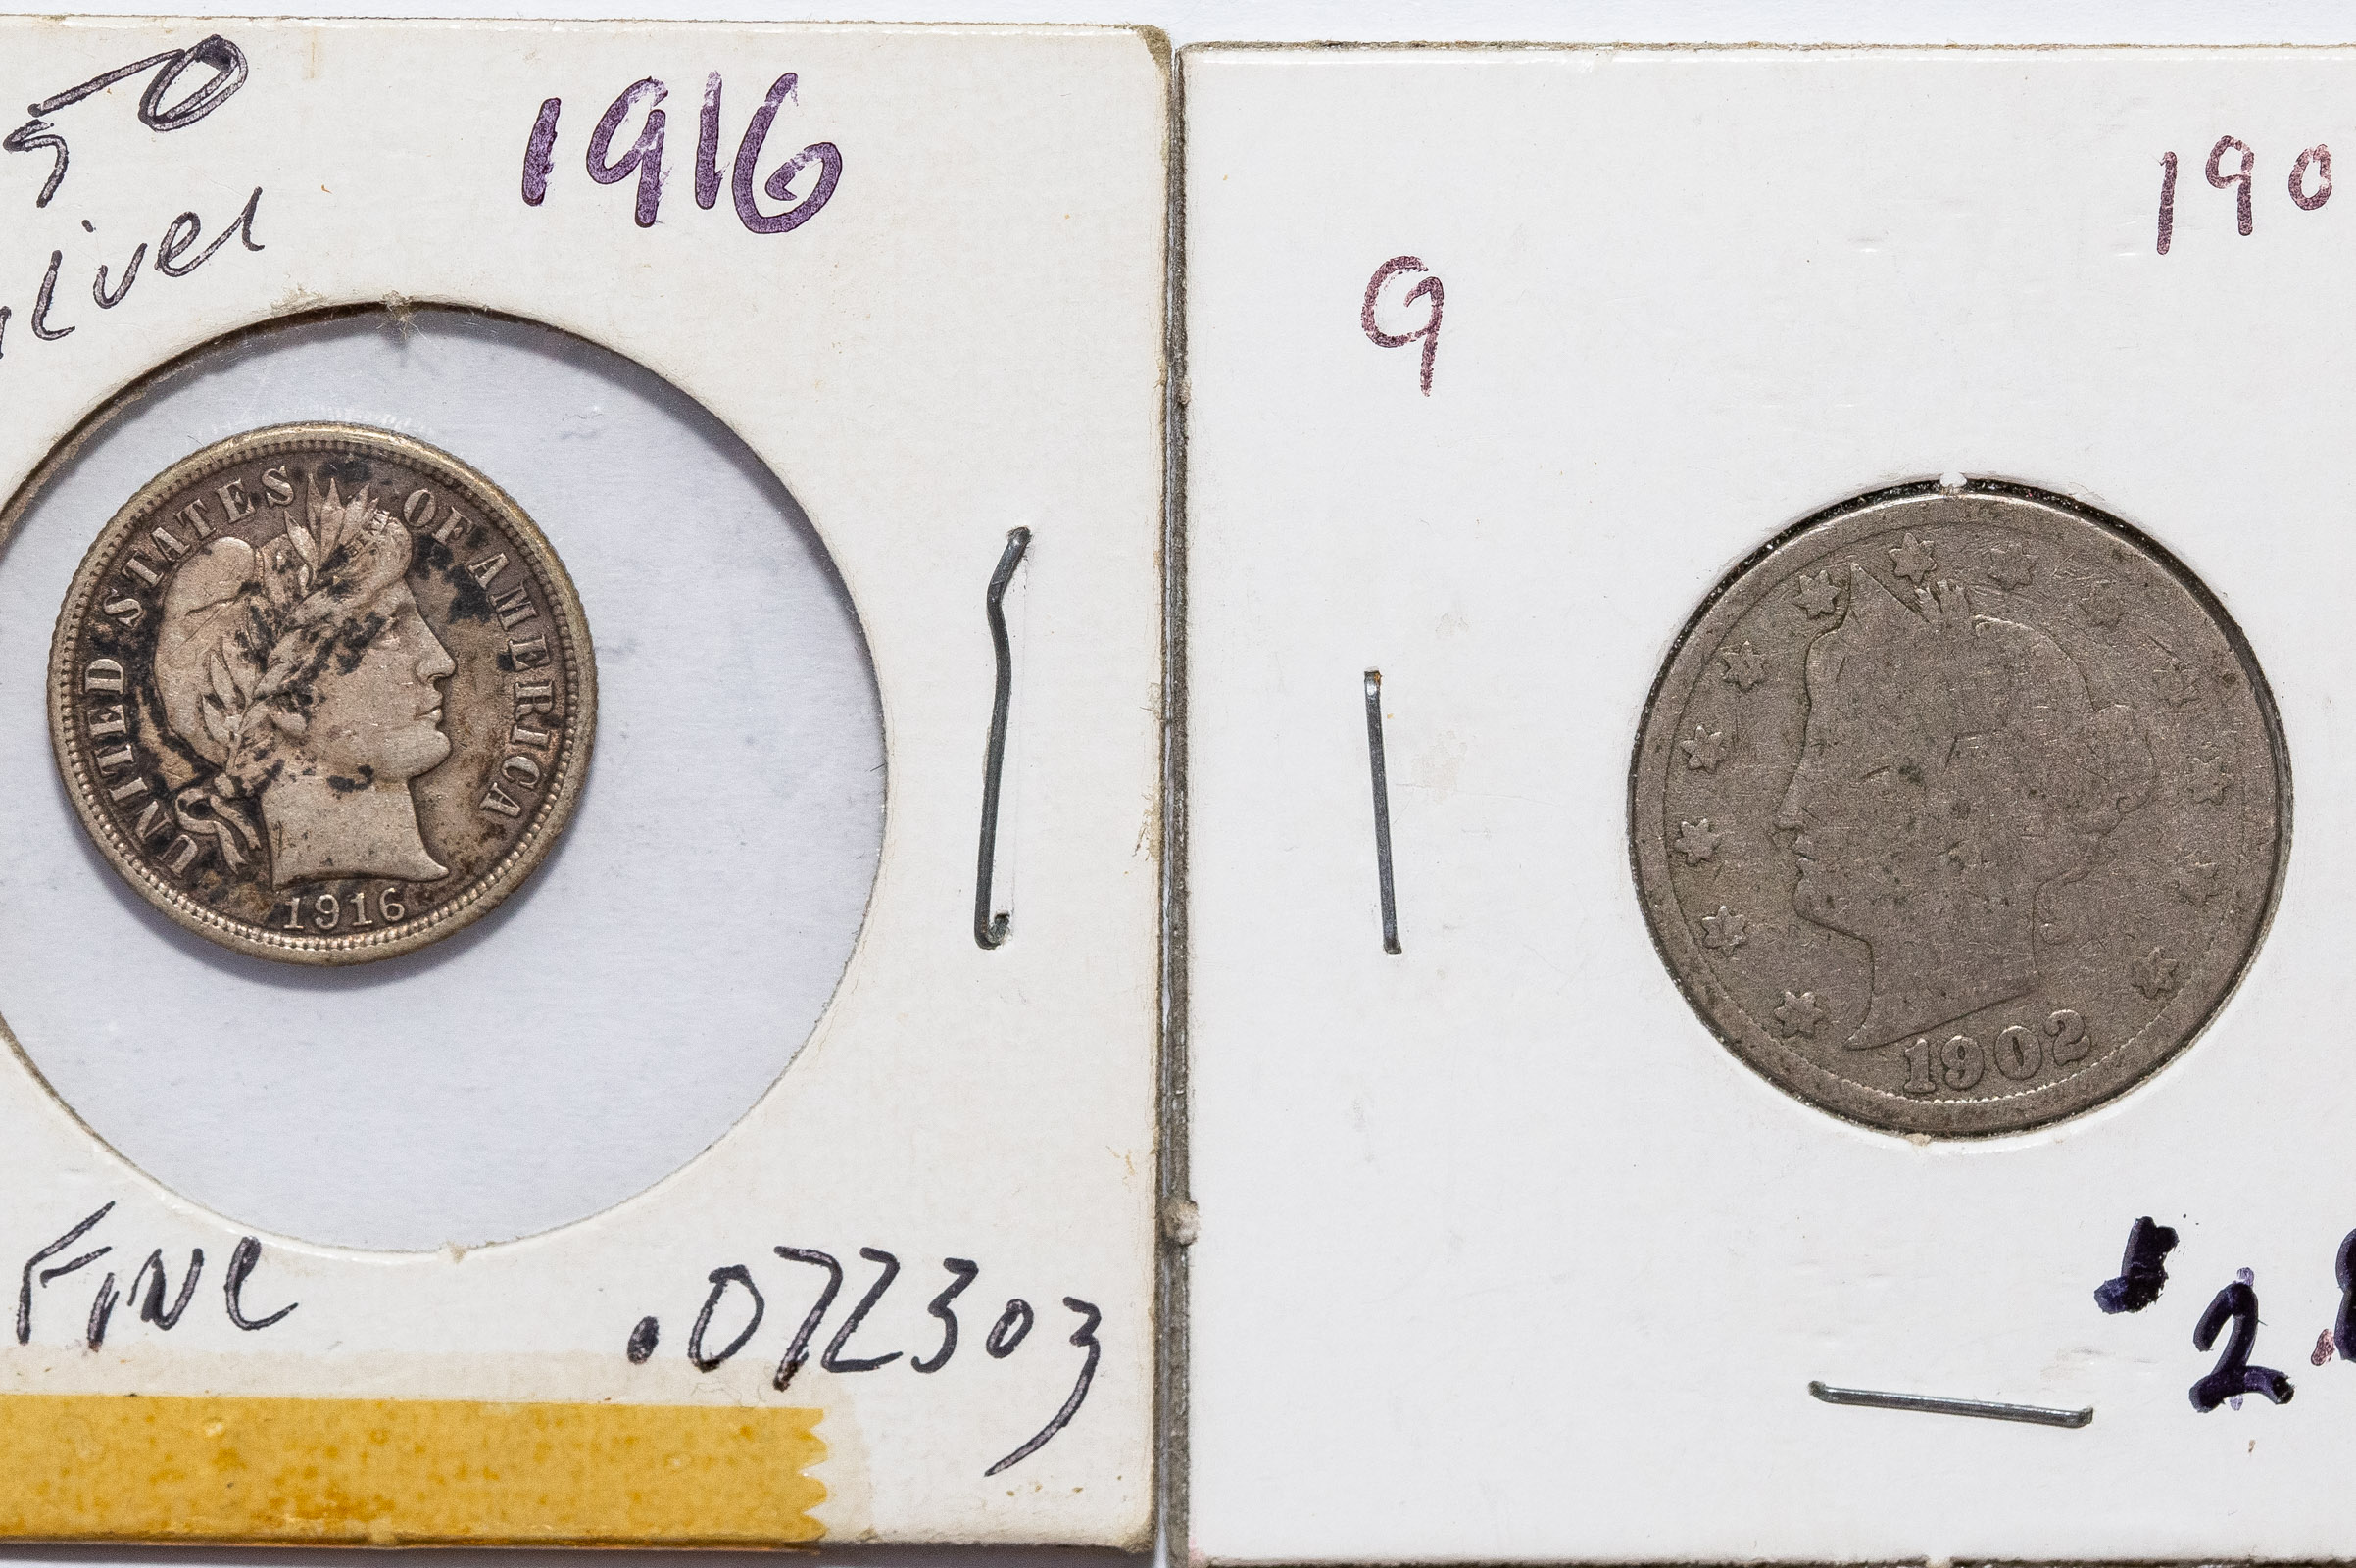 US TYPE COINS WITH SOME ISSUES